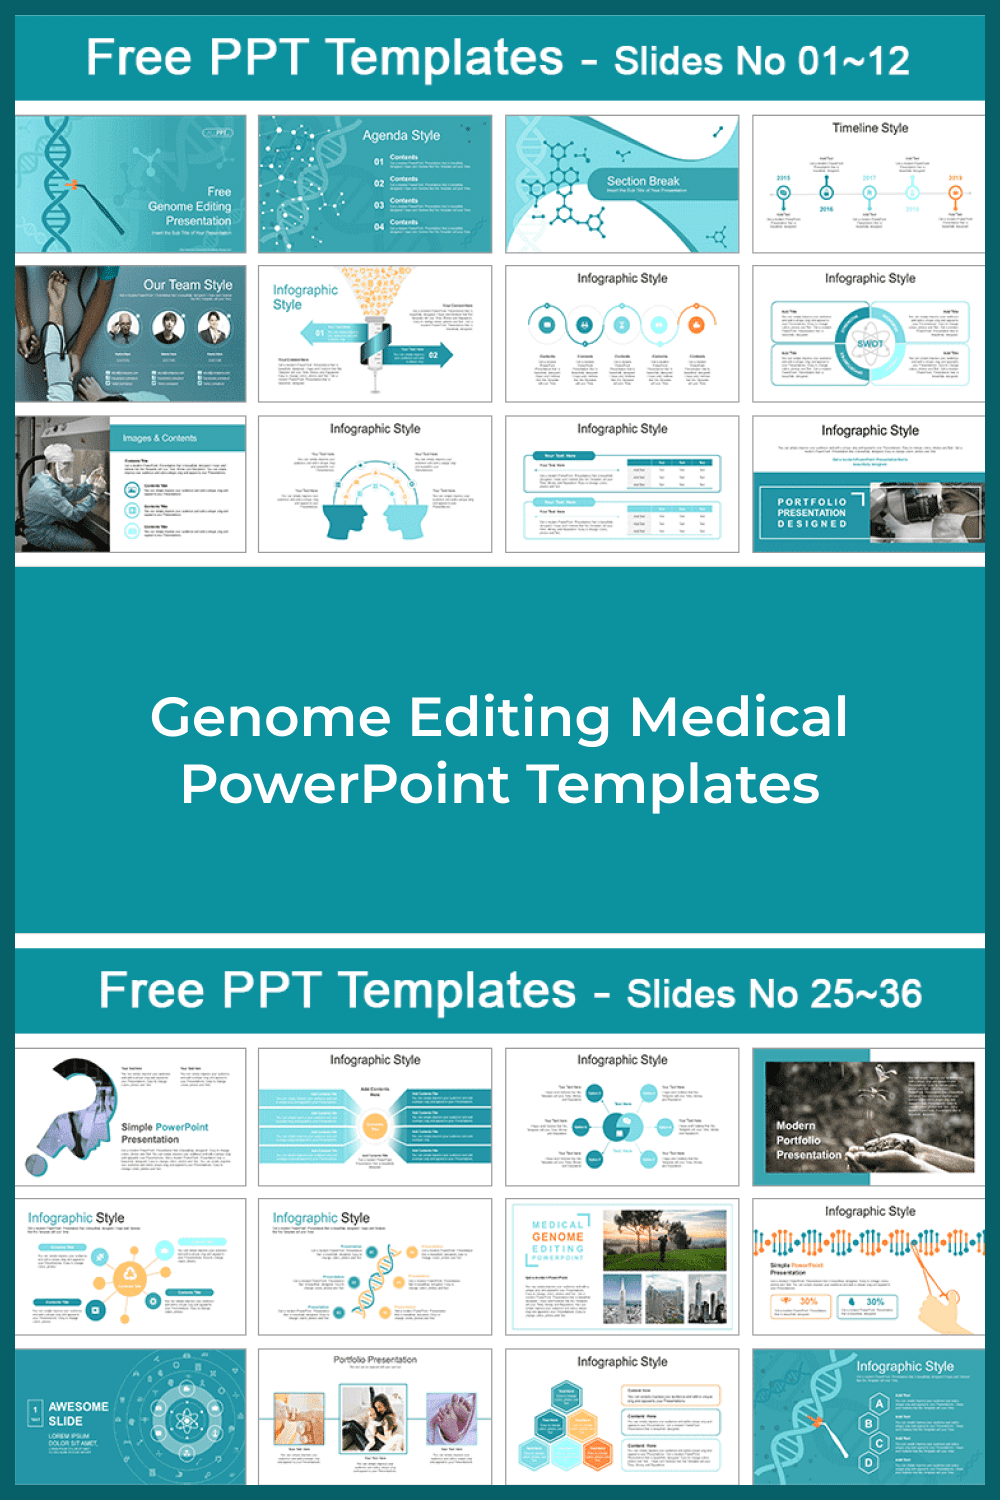 Genome editing medical powerpoint templates.